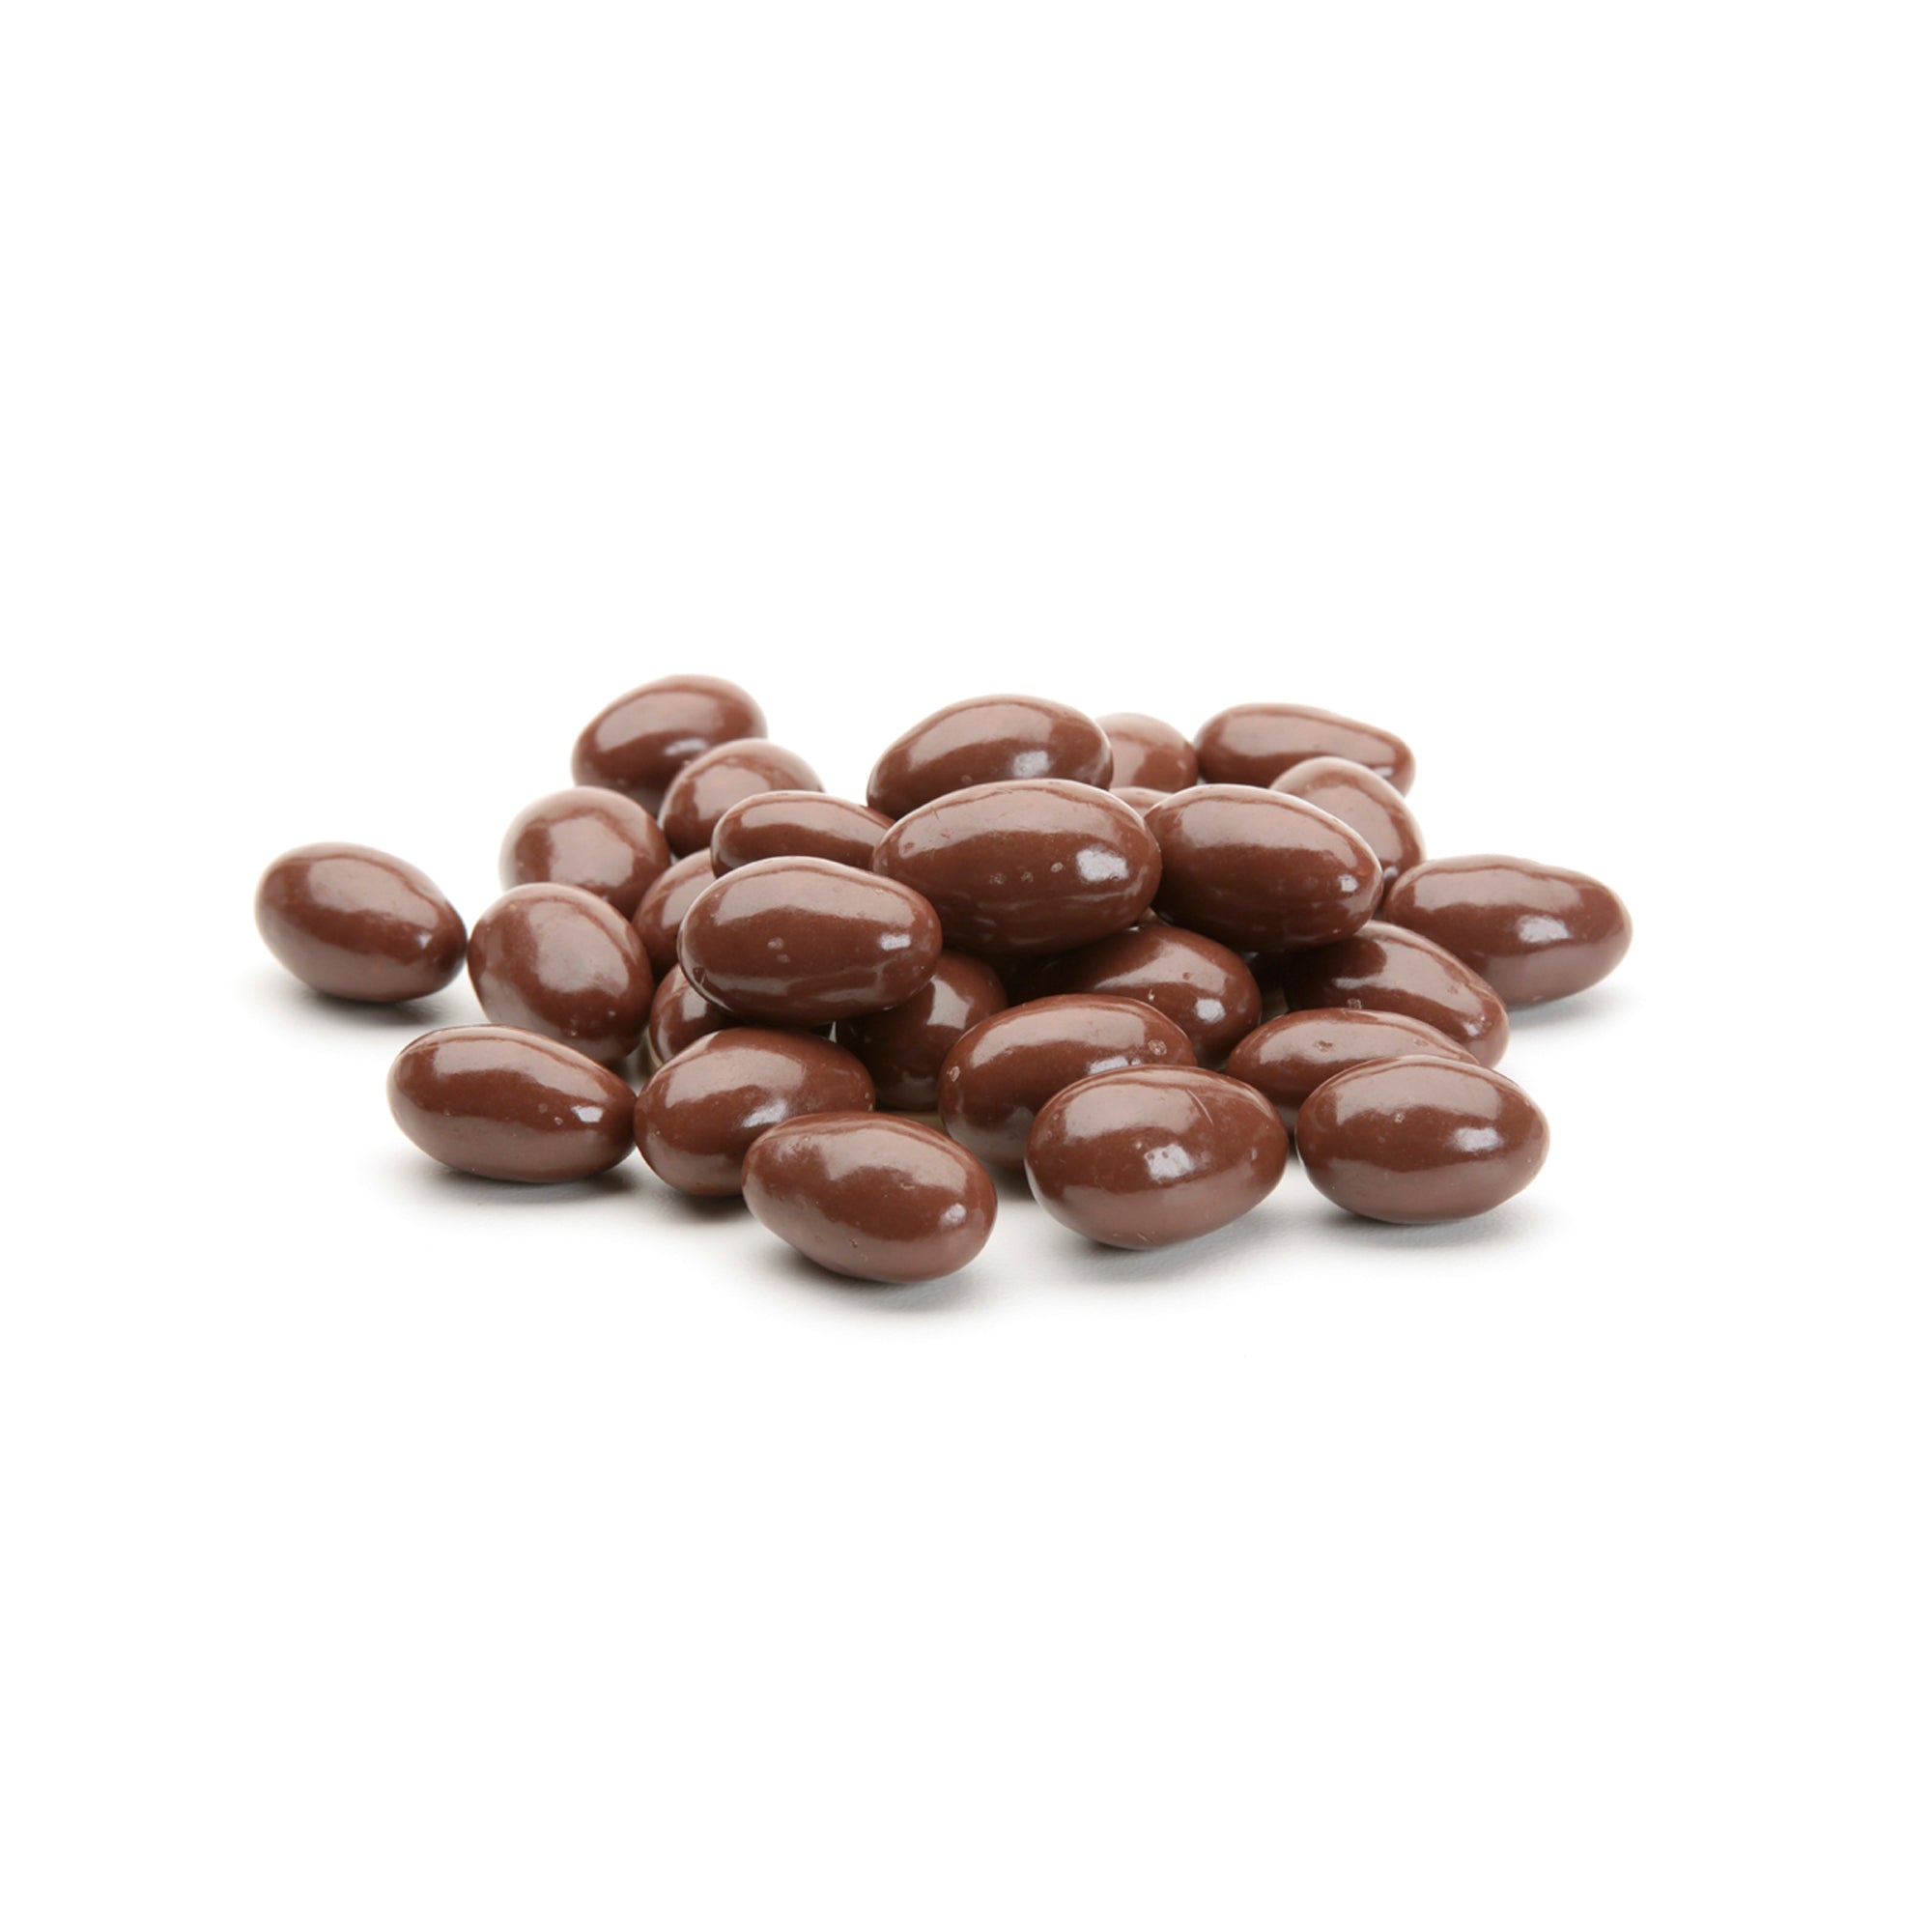 Almonds covered with chocolate